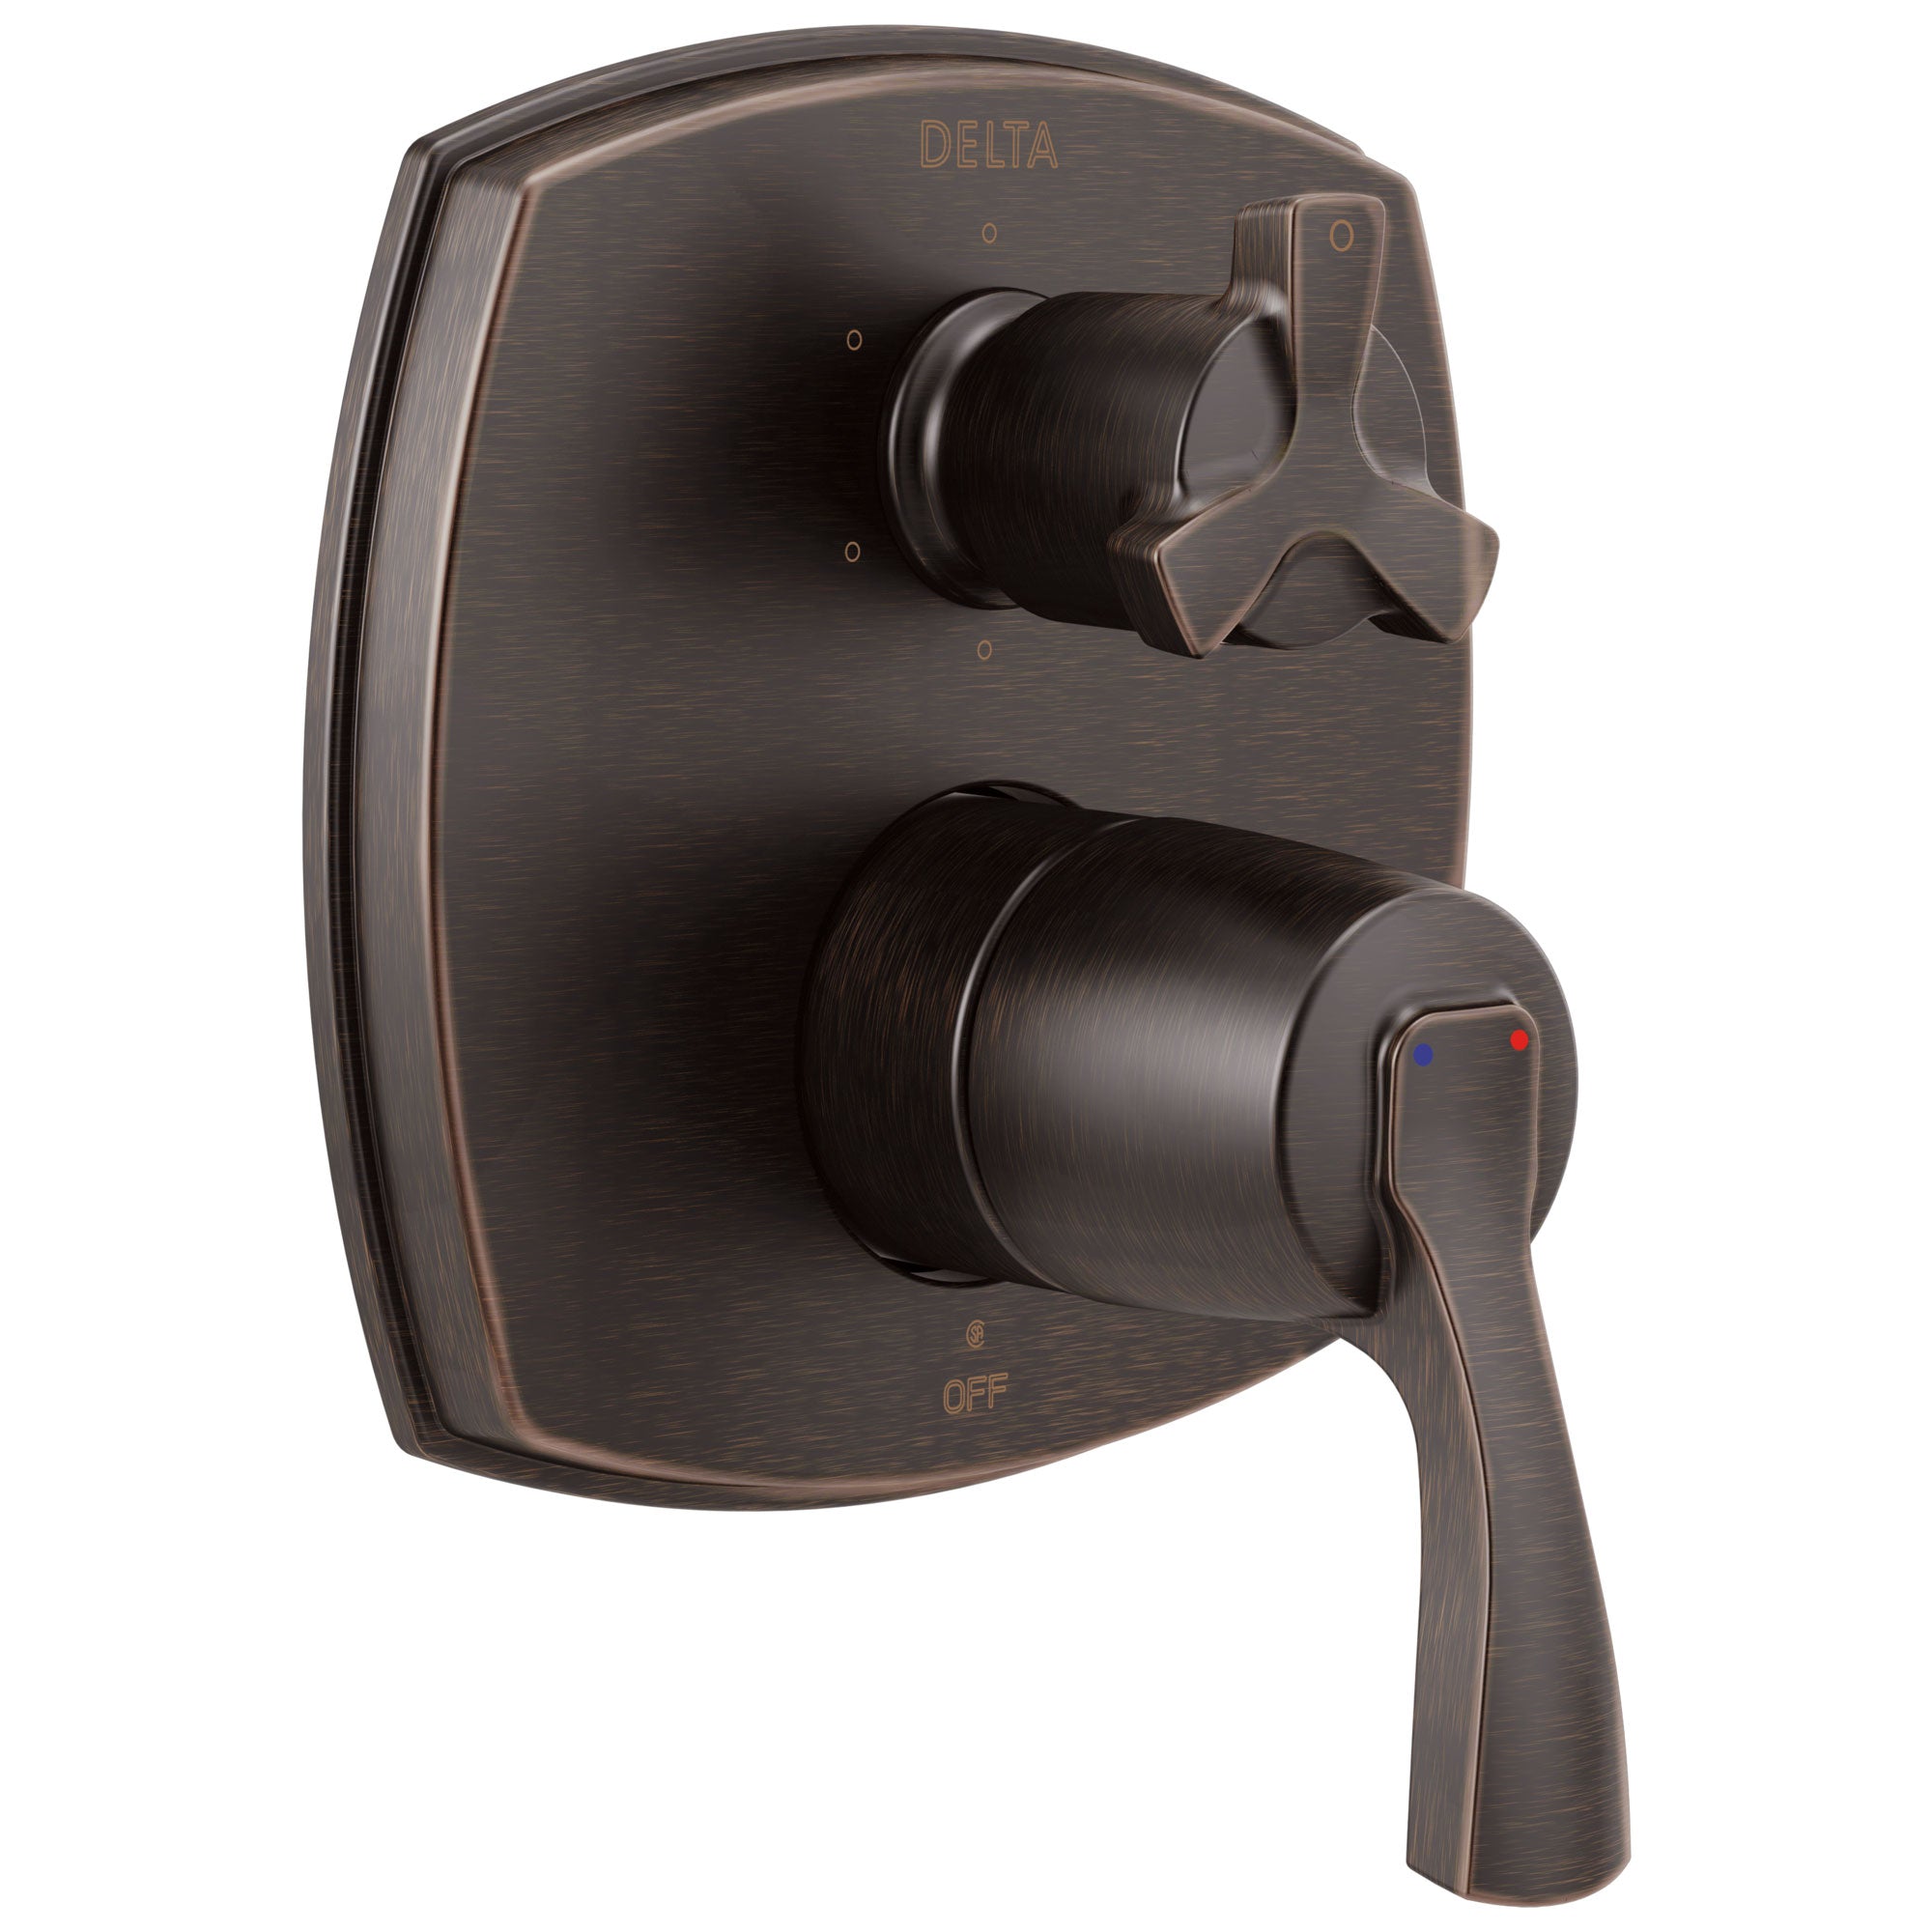 Delta Stryke Venetian Bronze Finish 14 Series Shower System Control with Integrated 6 Function Cross Handle Diverter Includes Valve and Handles D3176V